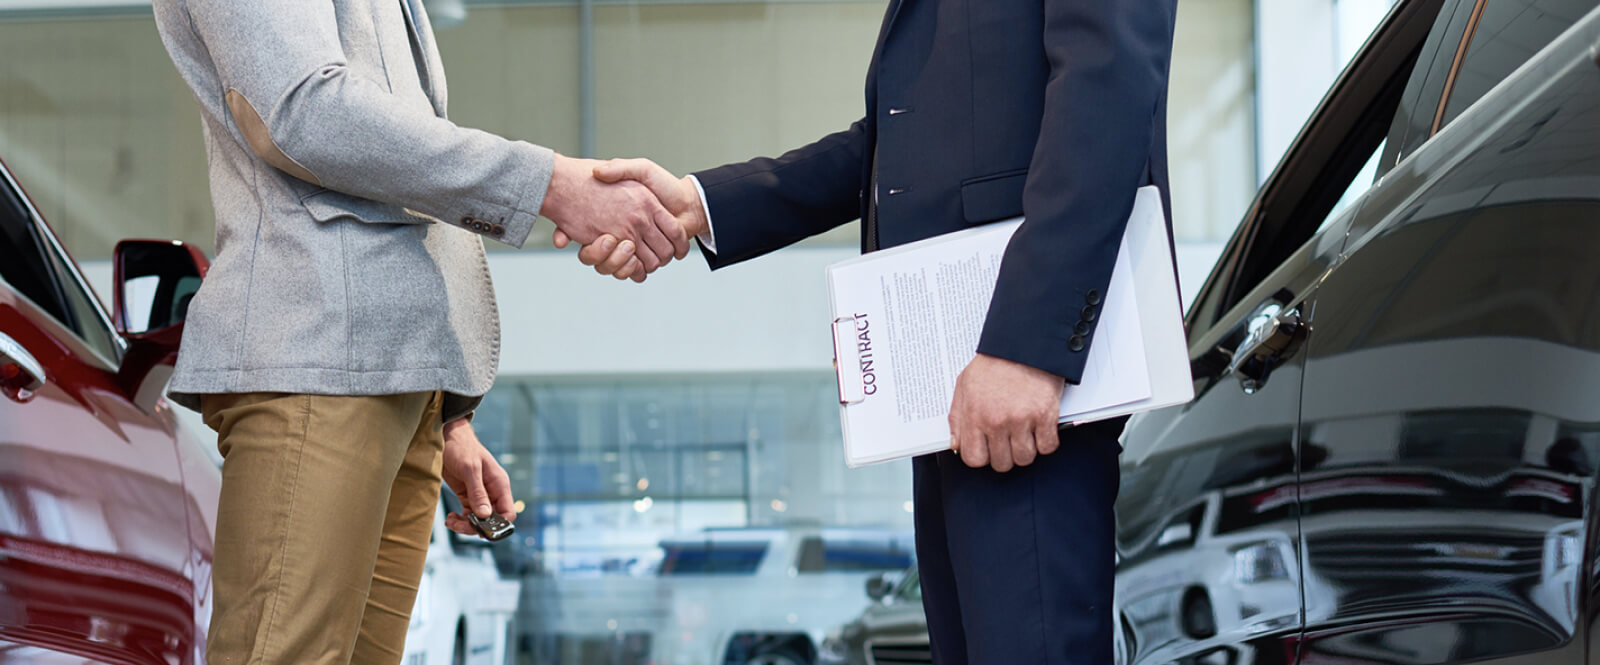 Two people shaking hands between showroom cars at a dealership